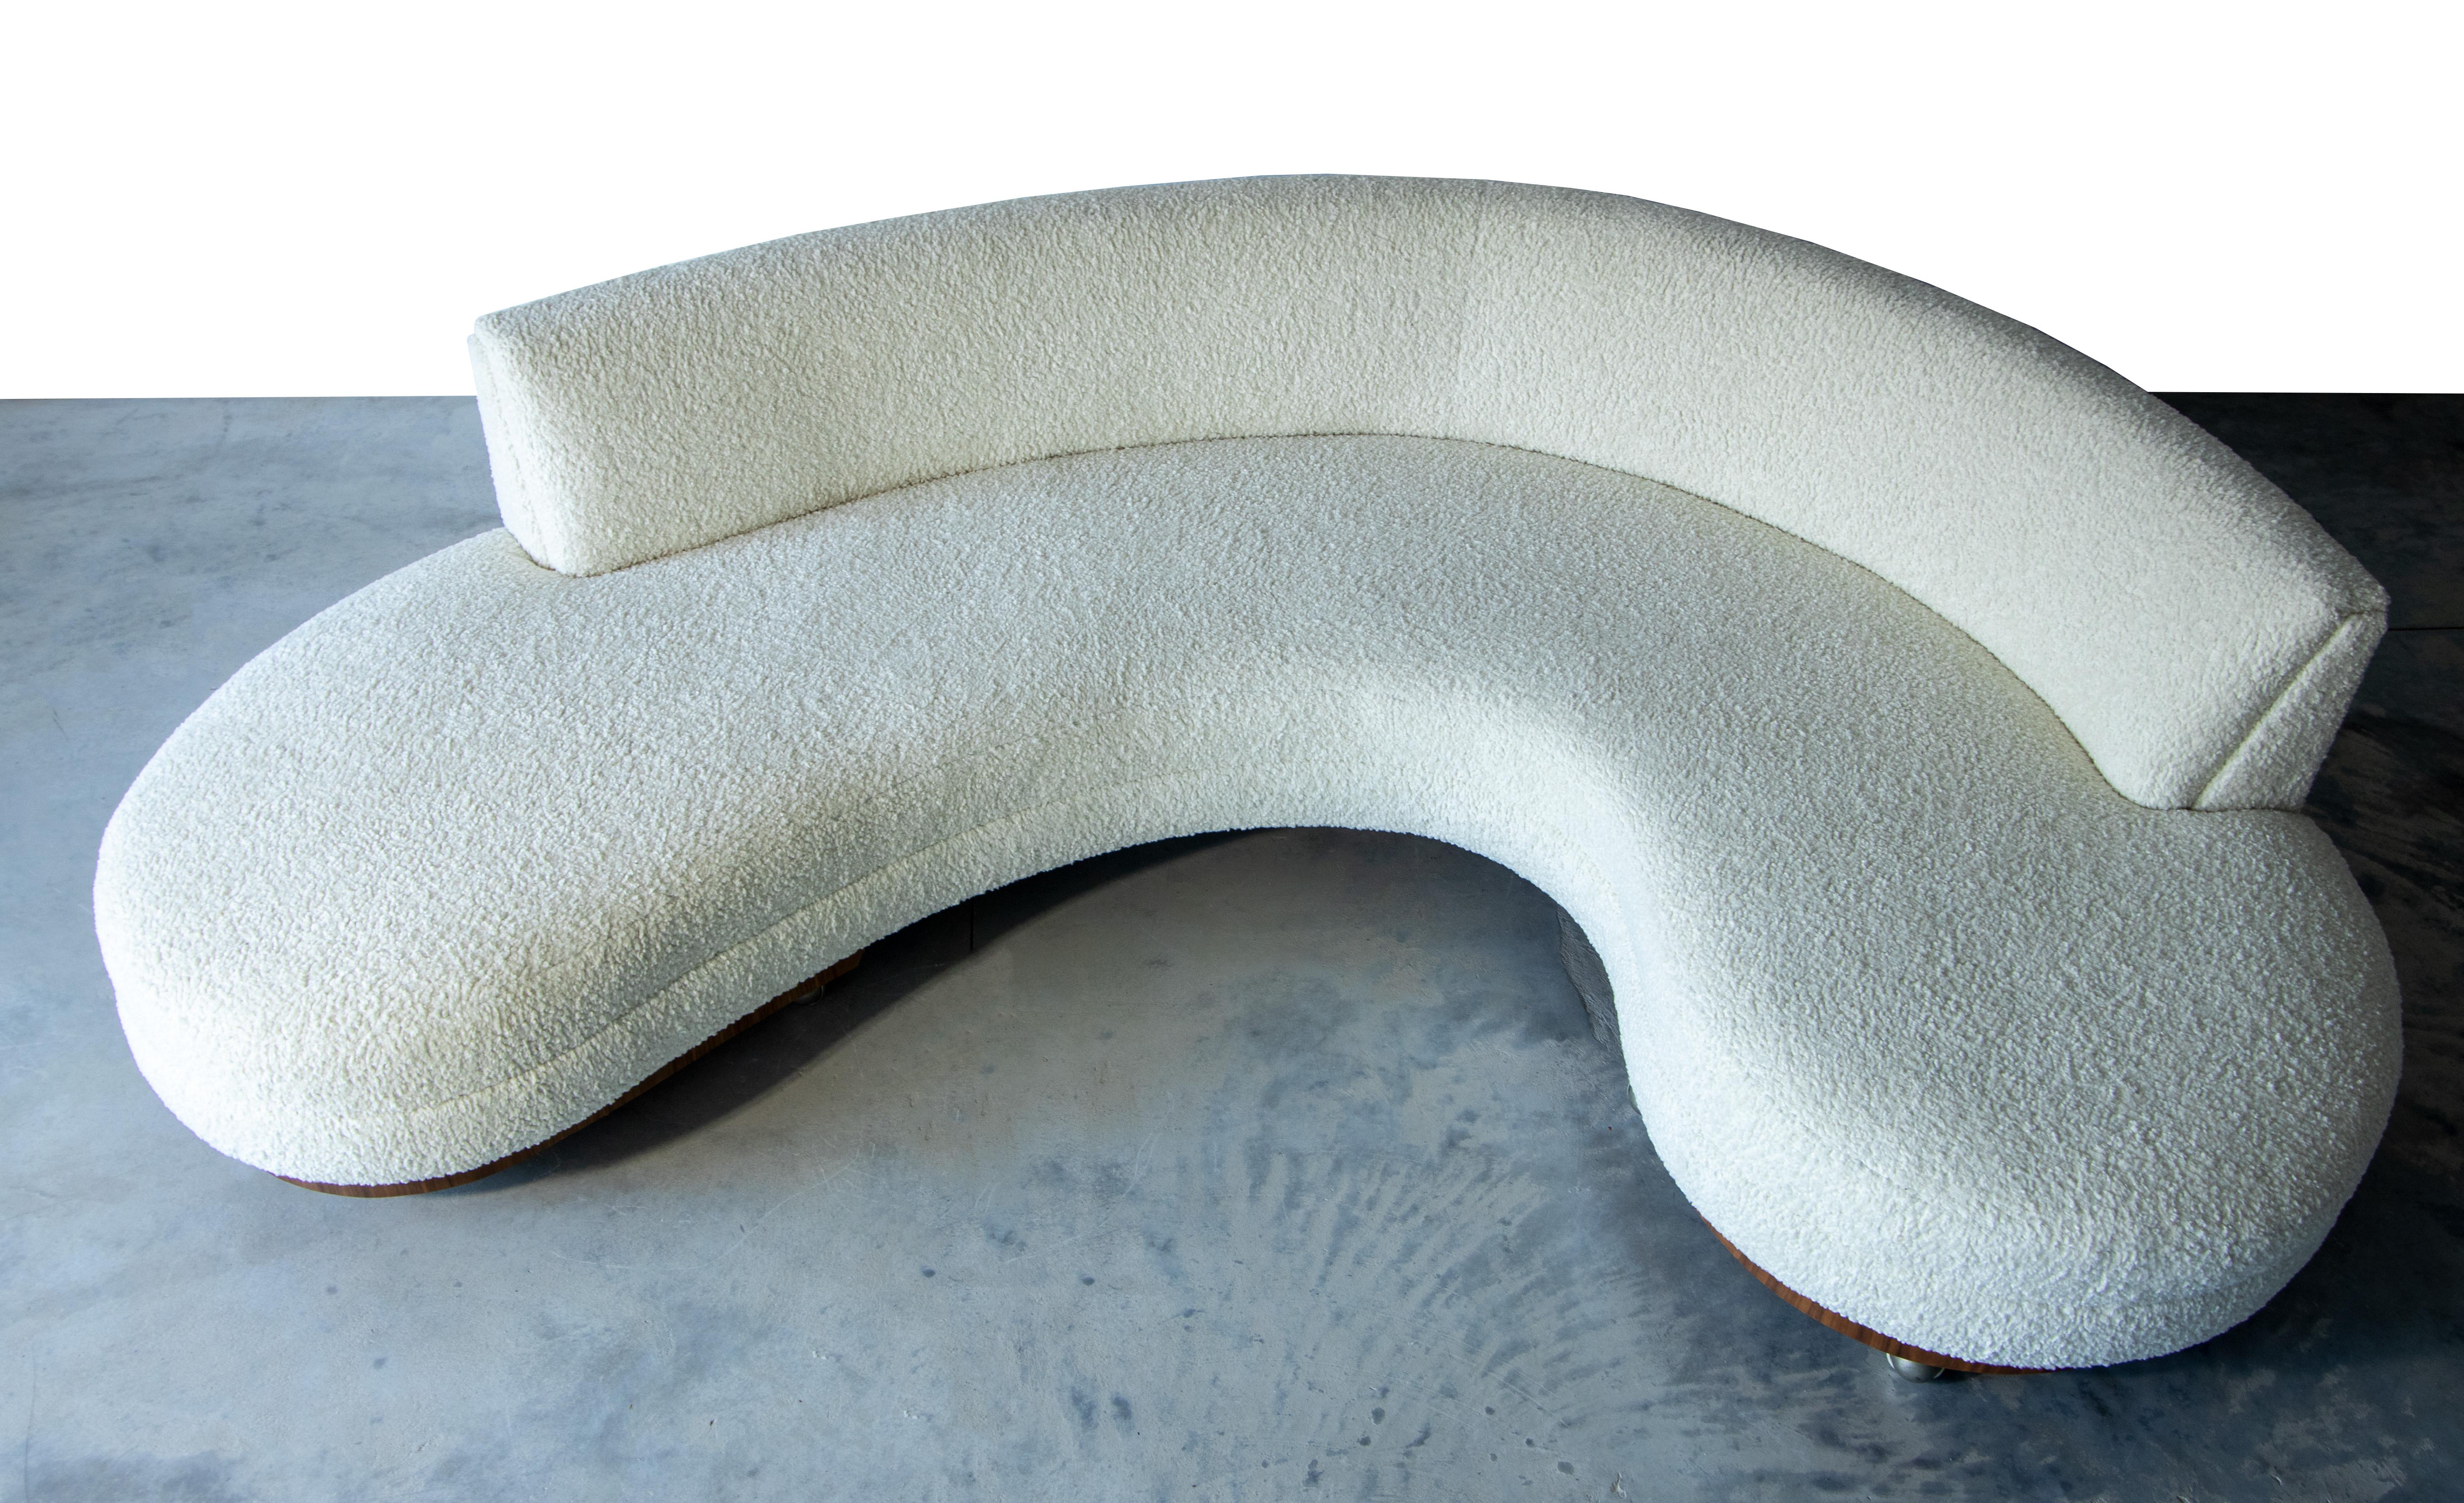 A curvy serpentine shaped sofa by the furniture company Harris of California. This design was until very recently attributed to an early serpentine sofa designed by Vladimir Kagan. We were able to obtain an original advertisement that proves this